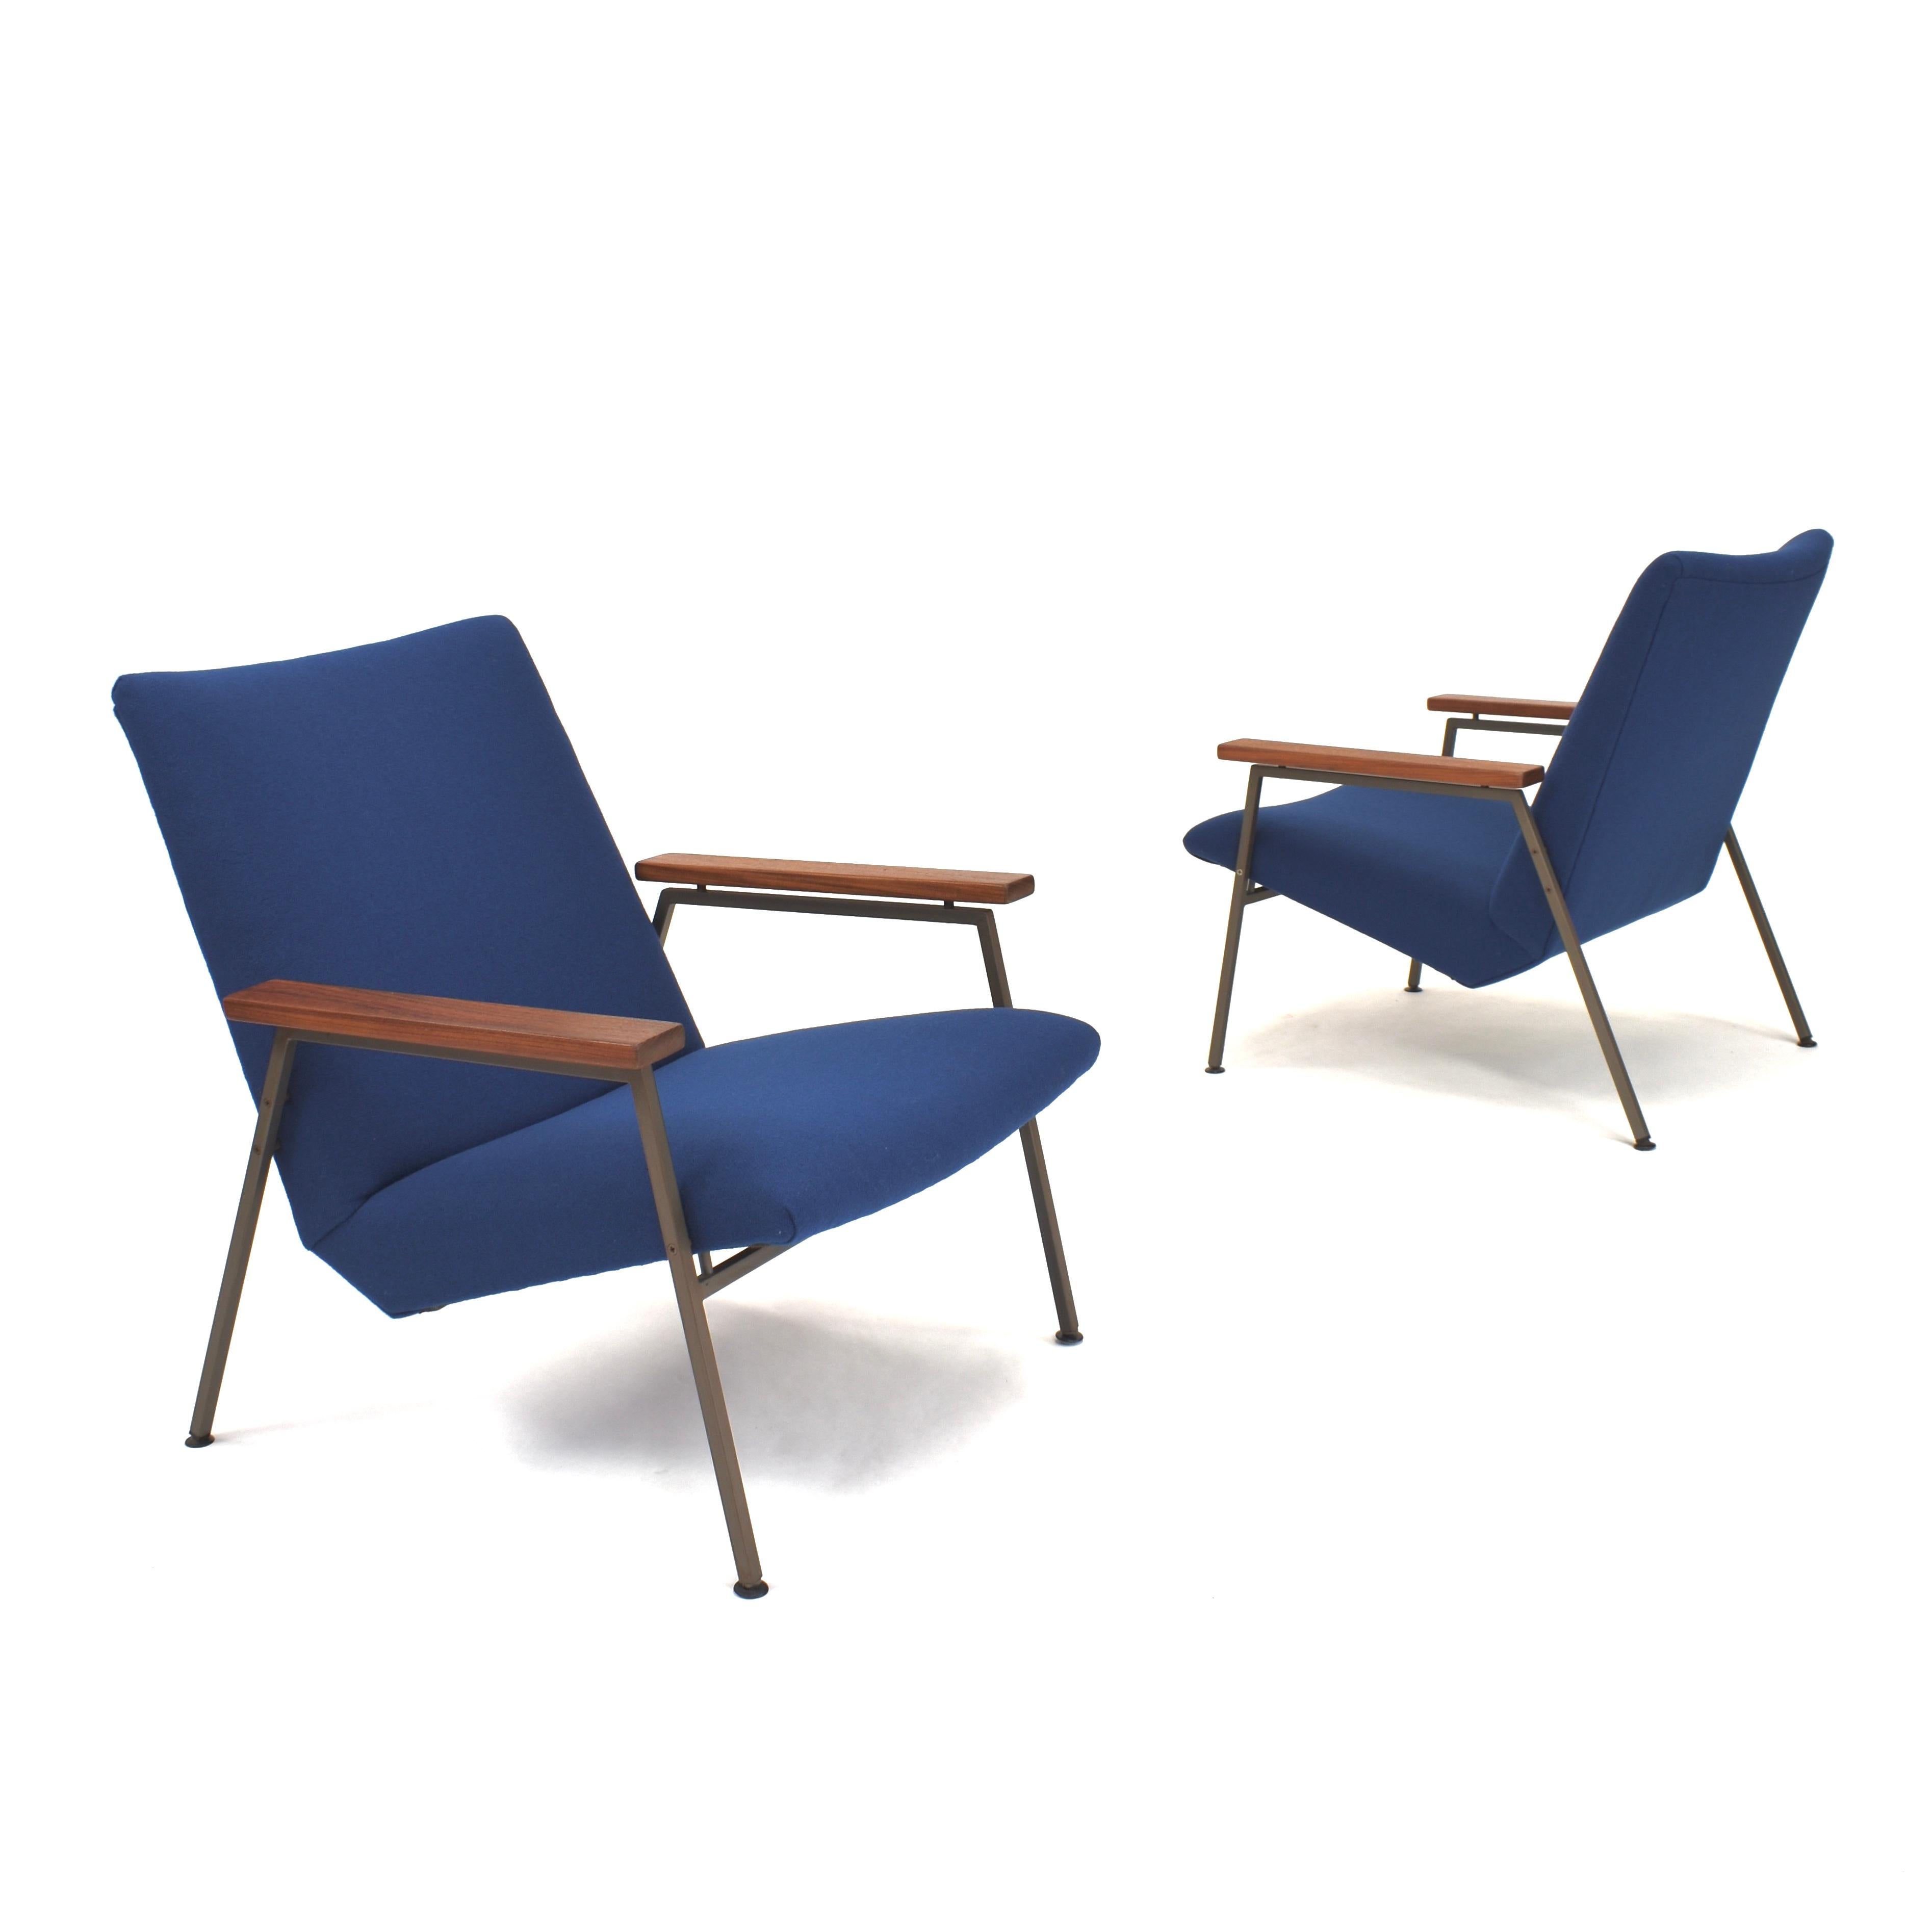 Beautiful minimalistic pair of Rob Parry ‘Lotus’ lounge chairs. The seats appear to be floating in the base.
New Kvadrat Tonus 4 upholstery and new foam filling. Solid teak armrests.

Designer: Rob Parry
Manufacturer: Gelderland
Country: